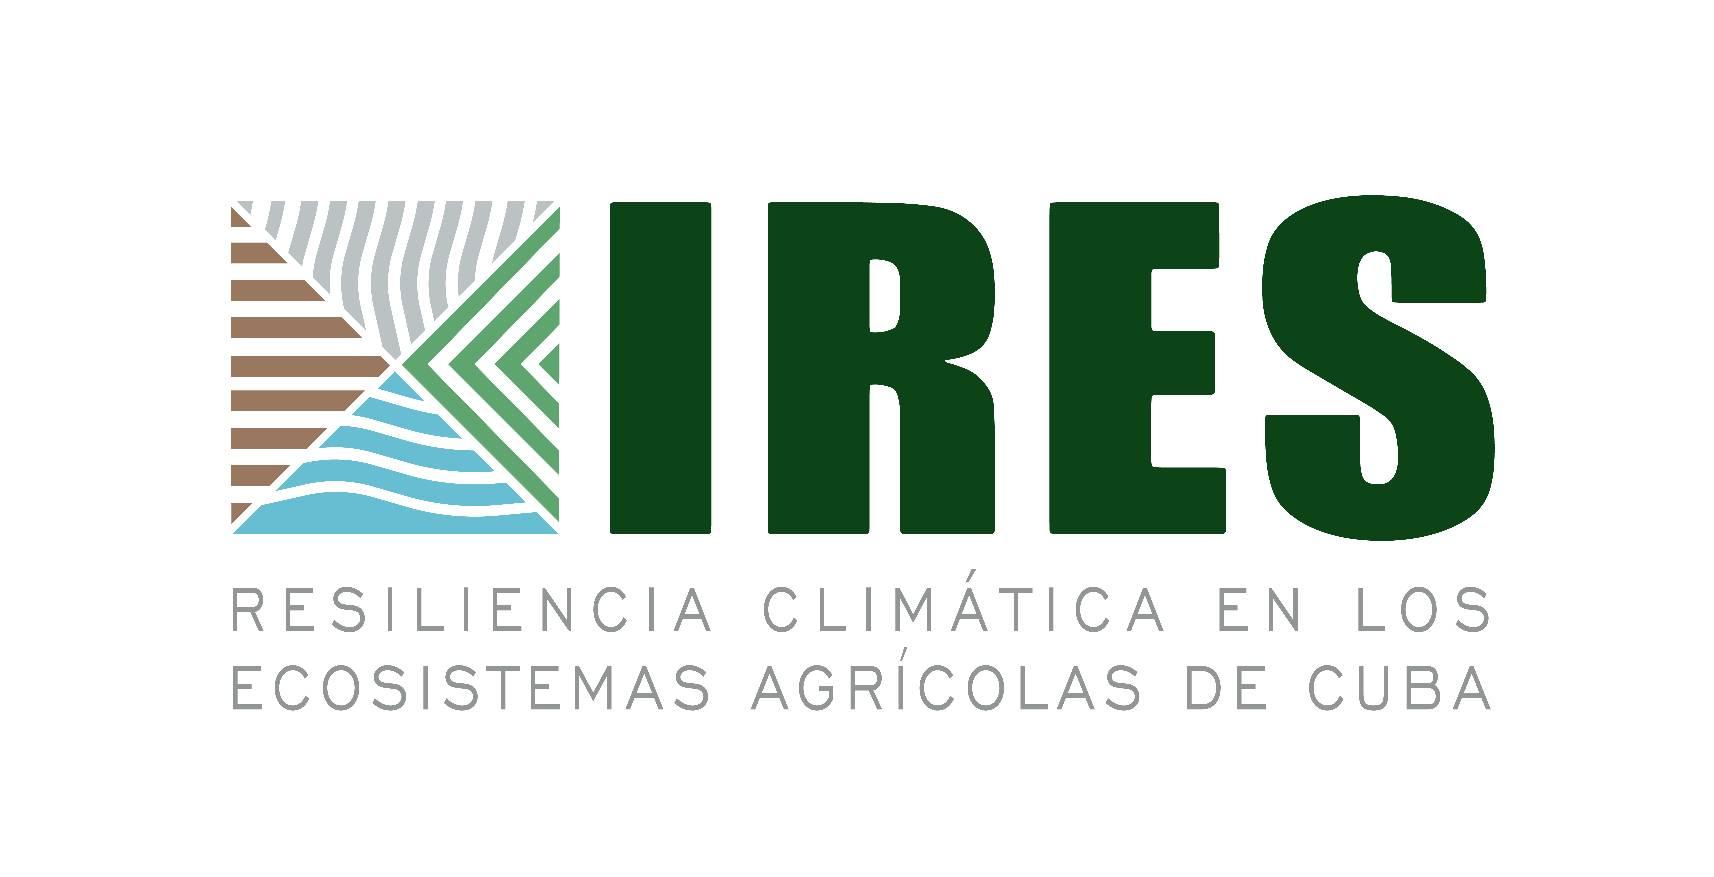 IRES project held a communication workshop in Las Tunas